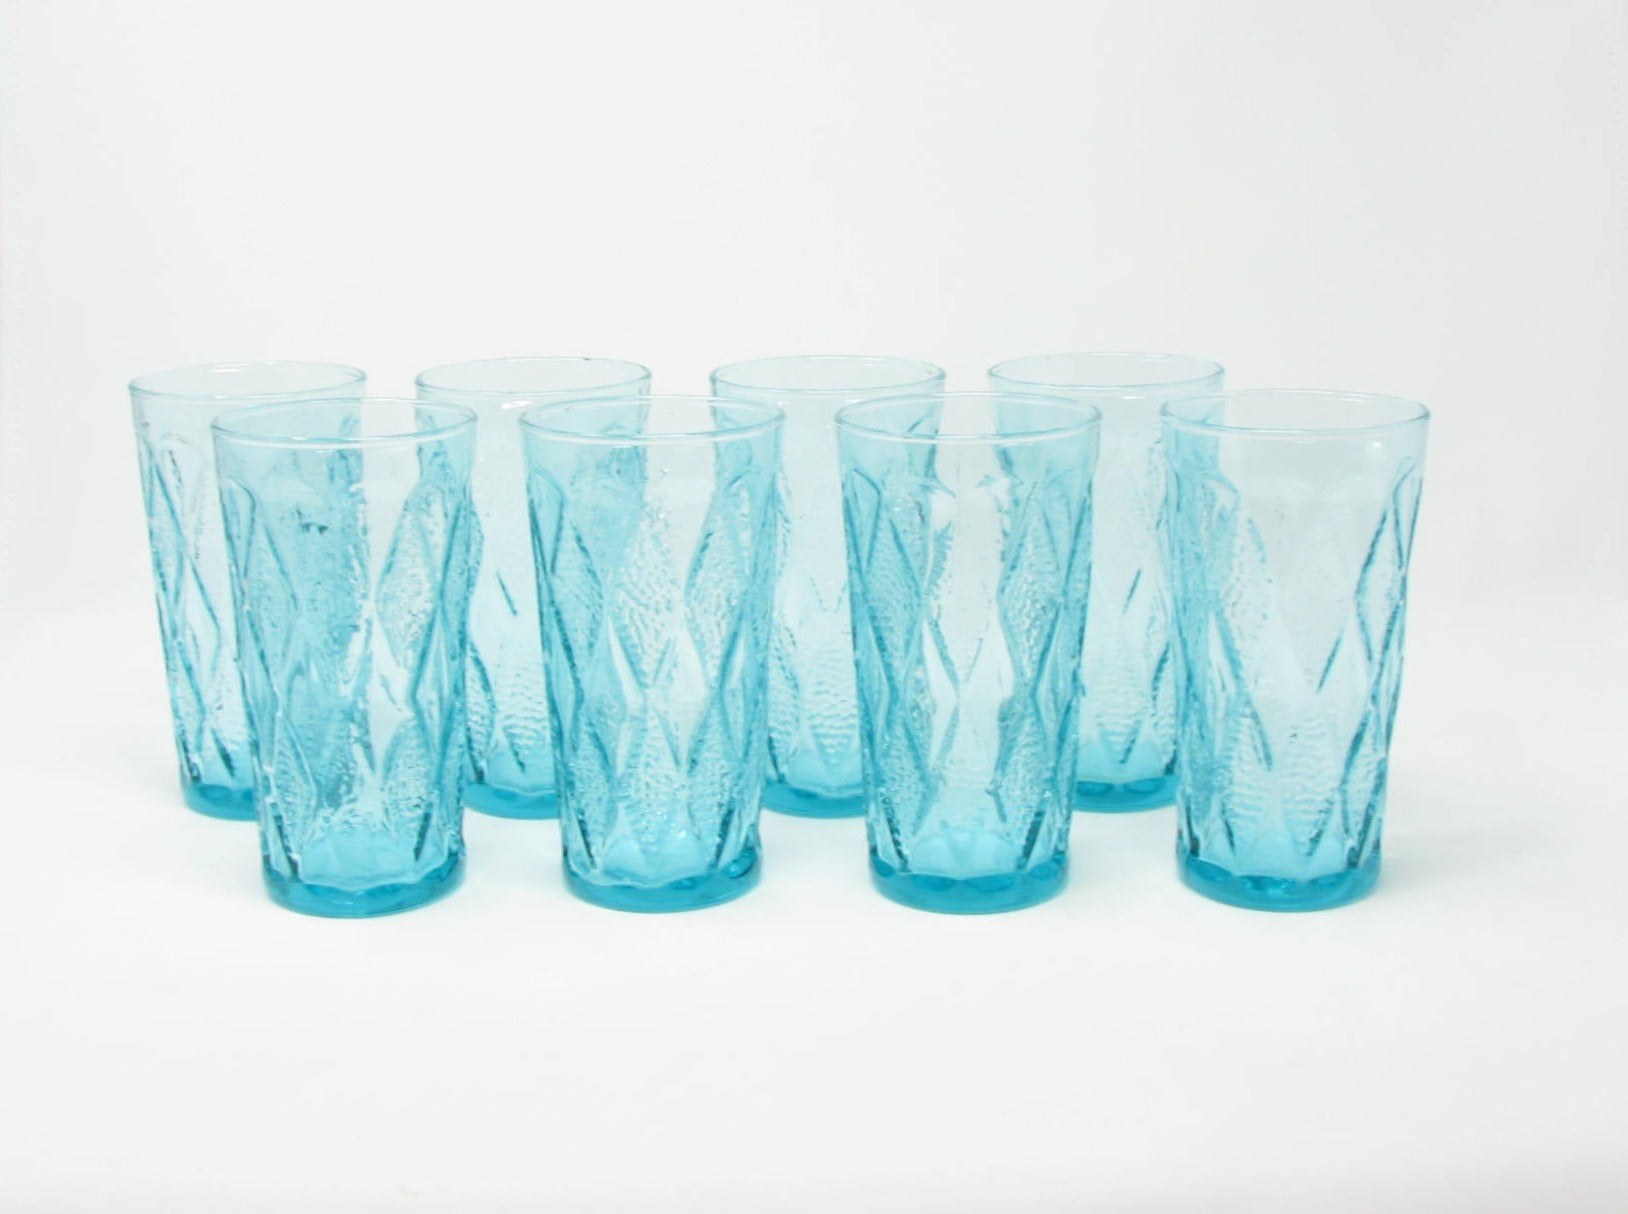 edgebrookhouse Vintage Anchor Hocking Gemstone Aquamarine Glass Tumblers with Quilted Diamond Design - 8 Pieces